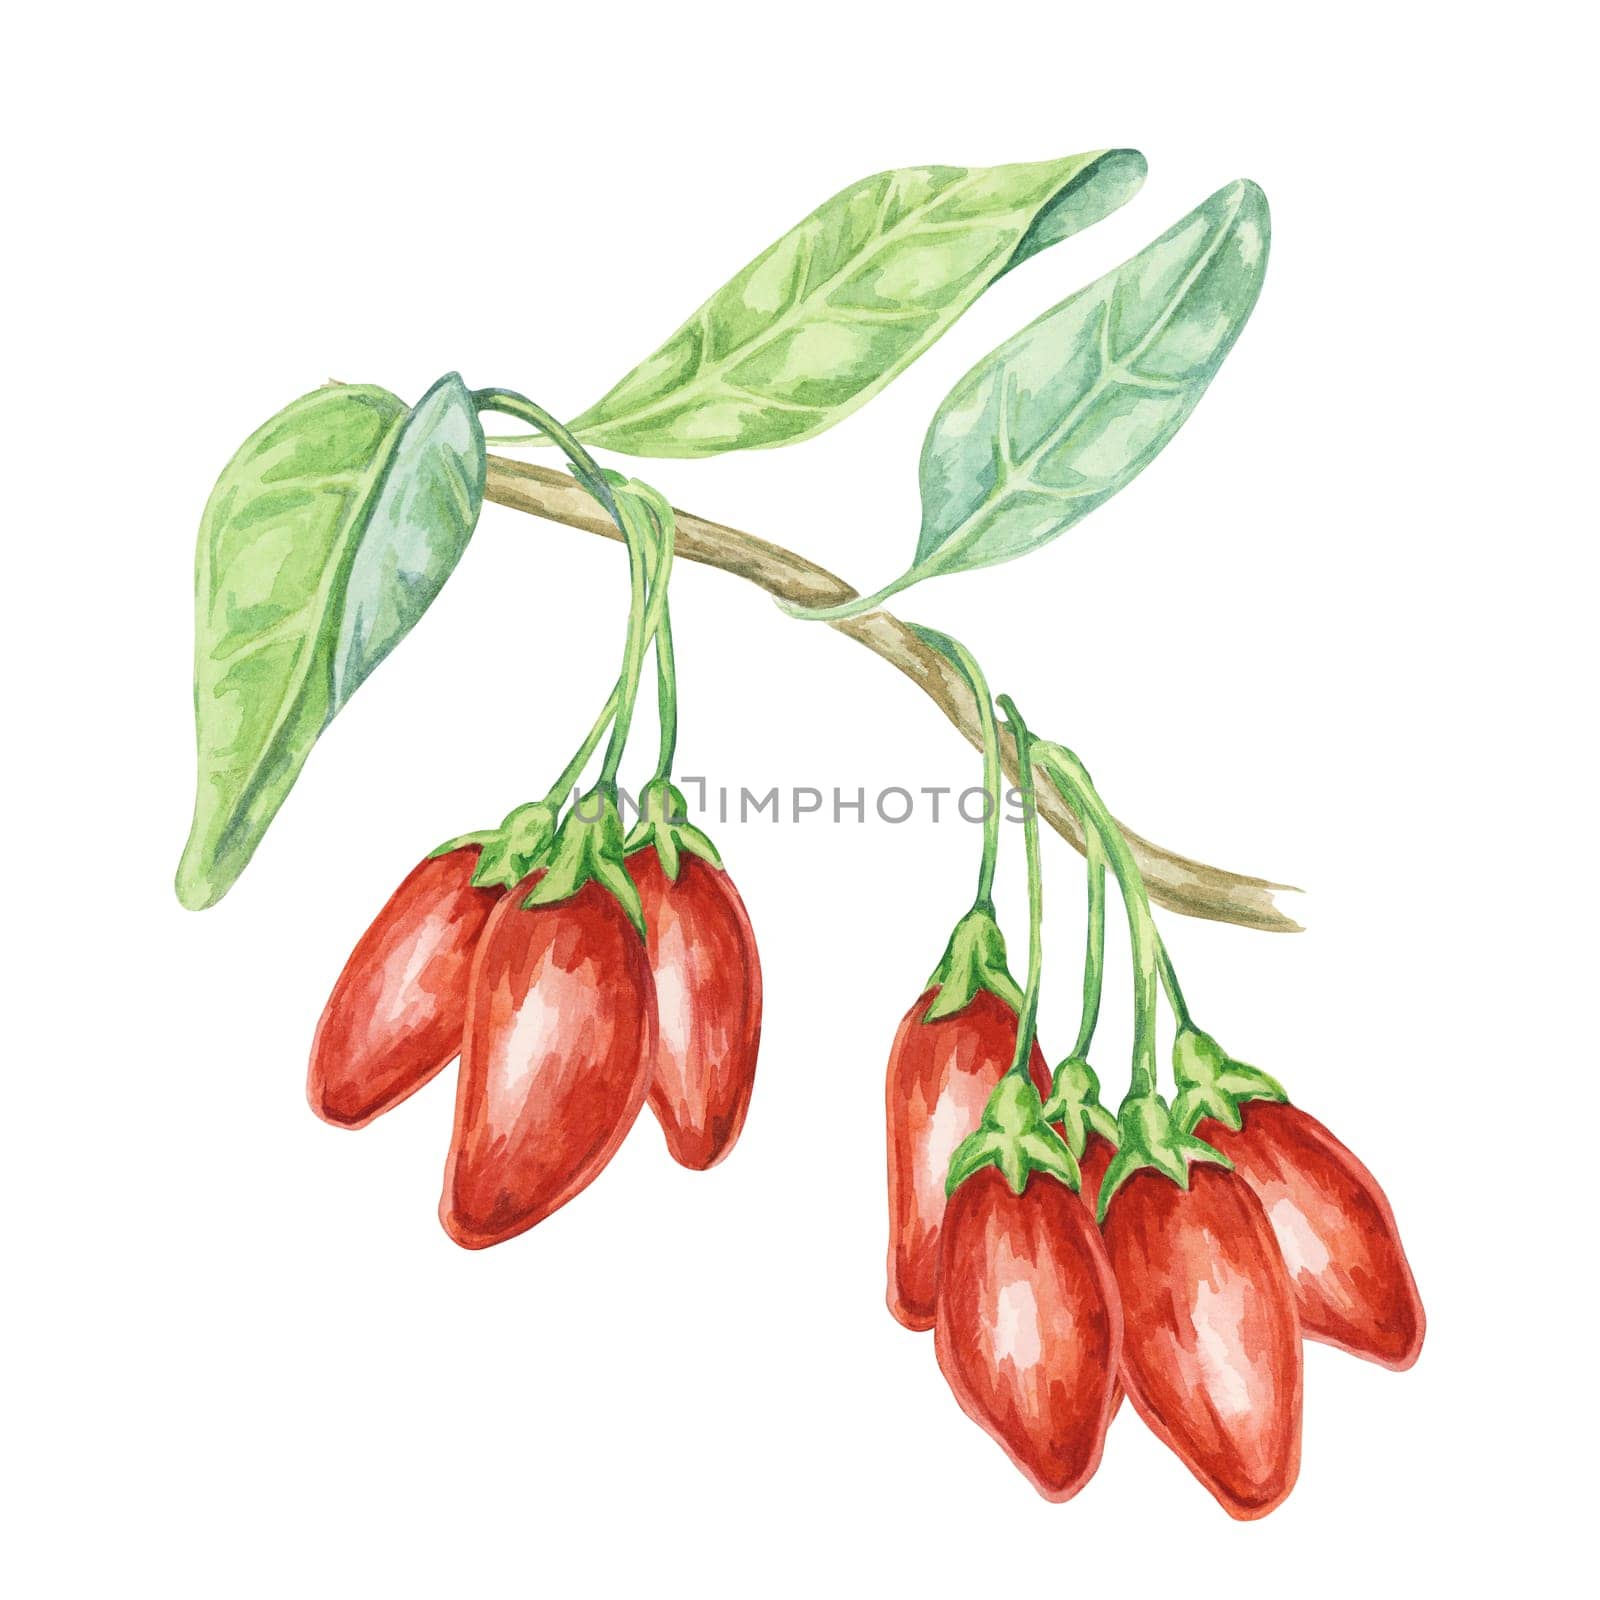 Multiple goji berries on the branch with leaves in watercolor isolated on white background. Hand-drawn clipart of licium barbarum fruits, leaves. Design for printing, packaging, cards, posters